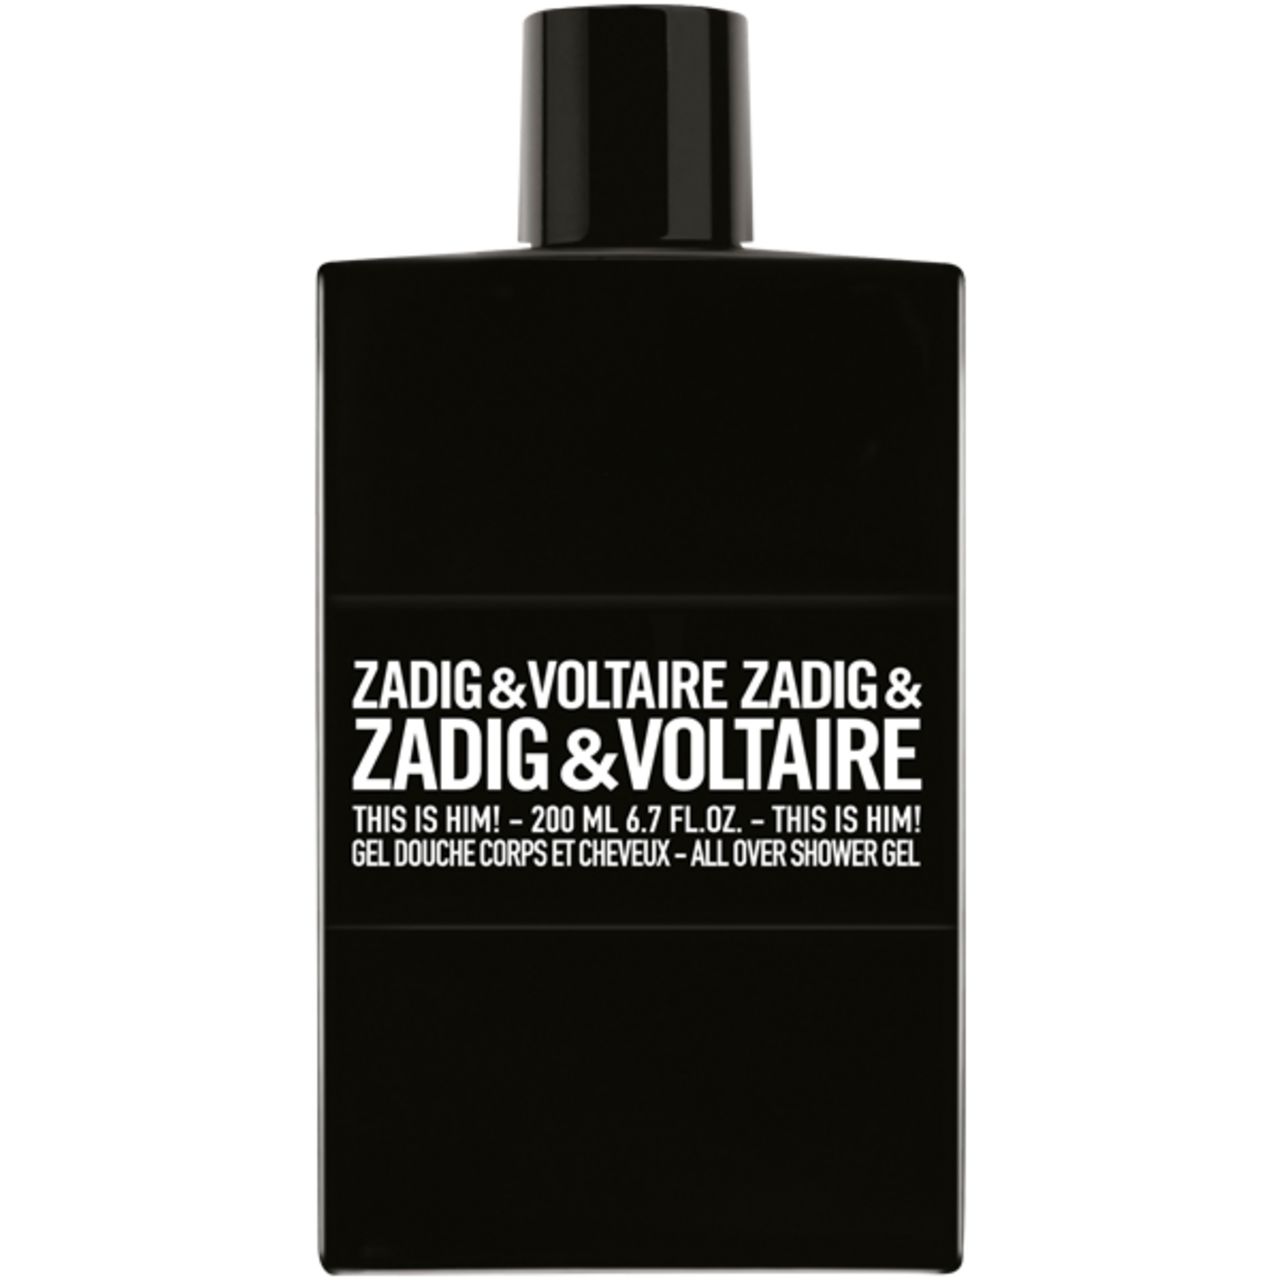 Zadig & Voltaire, This is Him! All Over Shower Gel